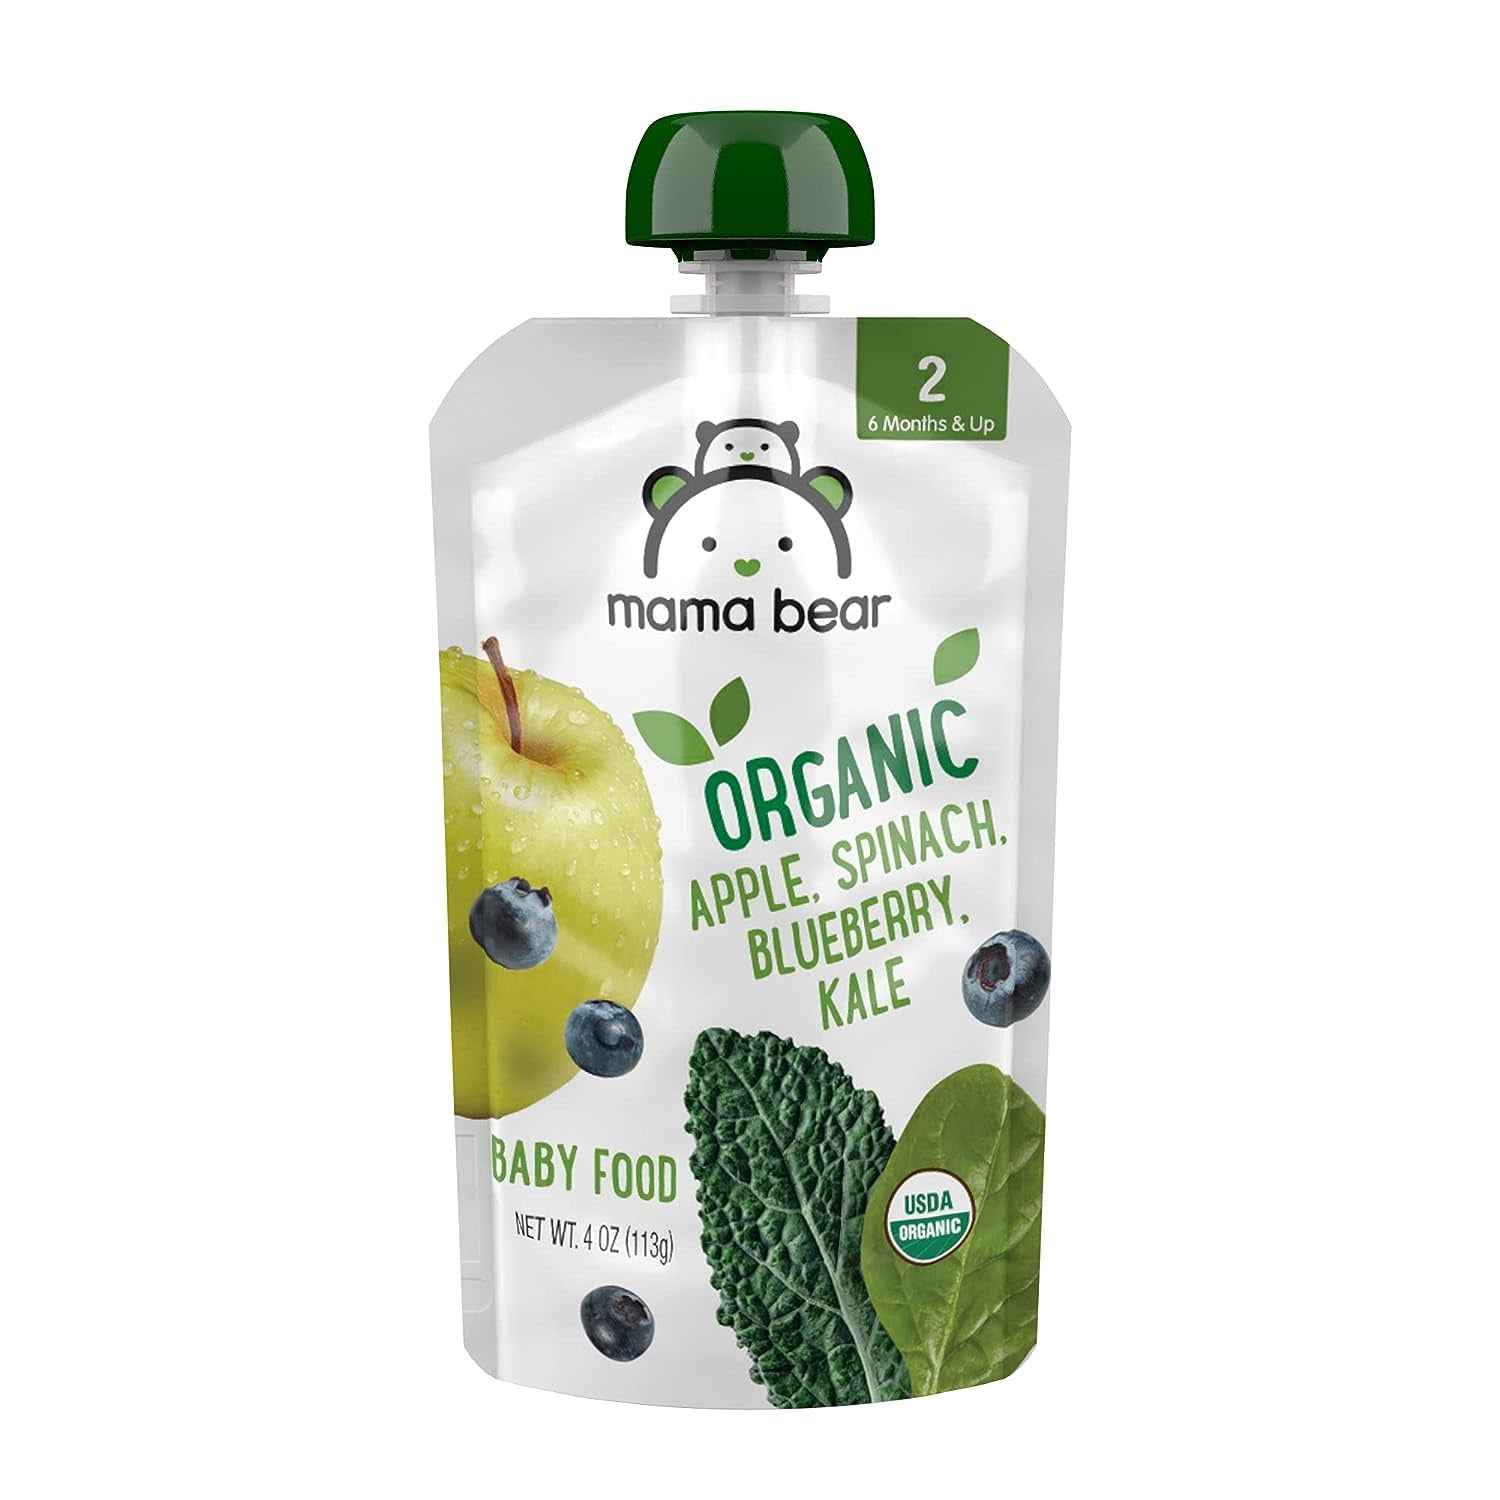 Mama Bear Organic Food pouch, Apple Spinach Blueberry Kale, 4oz